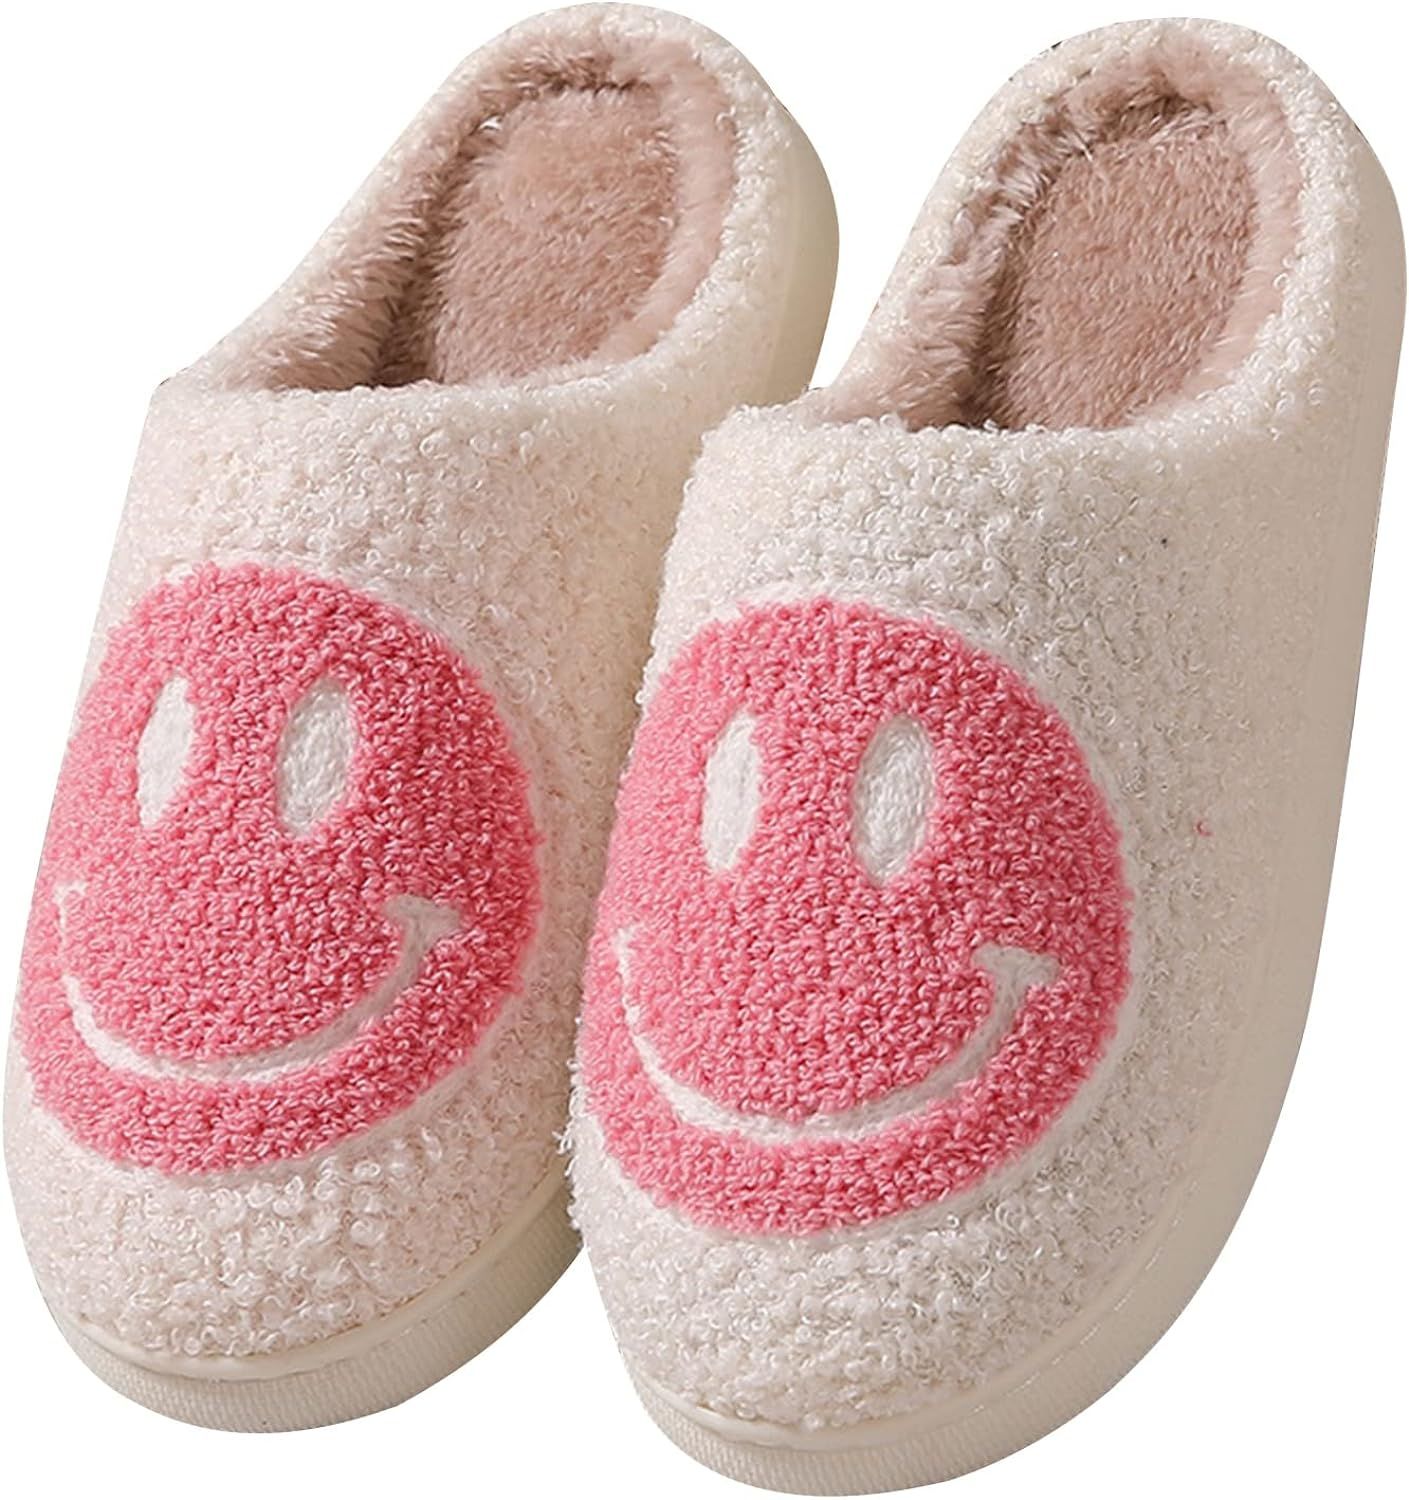 Smiley Face Slippers for Women and Men Retro Soft Plush Lightweight House Slippers Slip-on Cozy I... | Amazon (US)